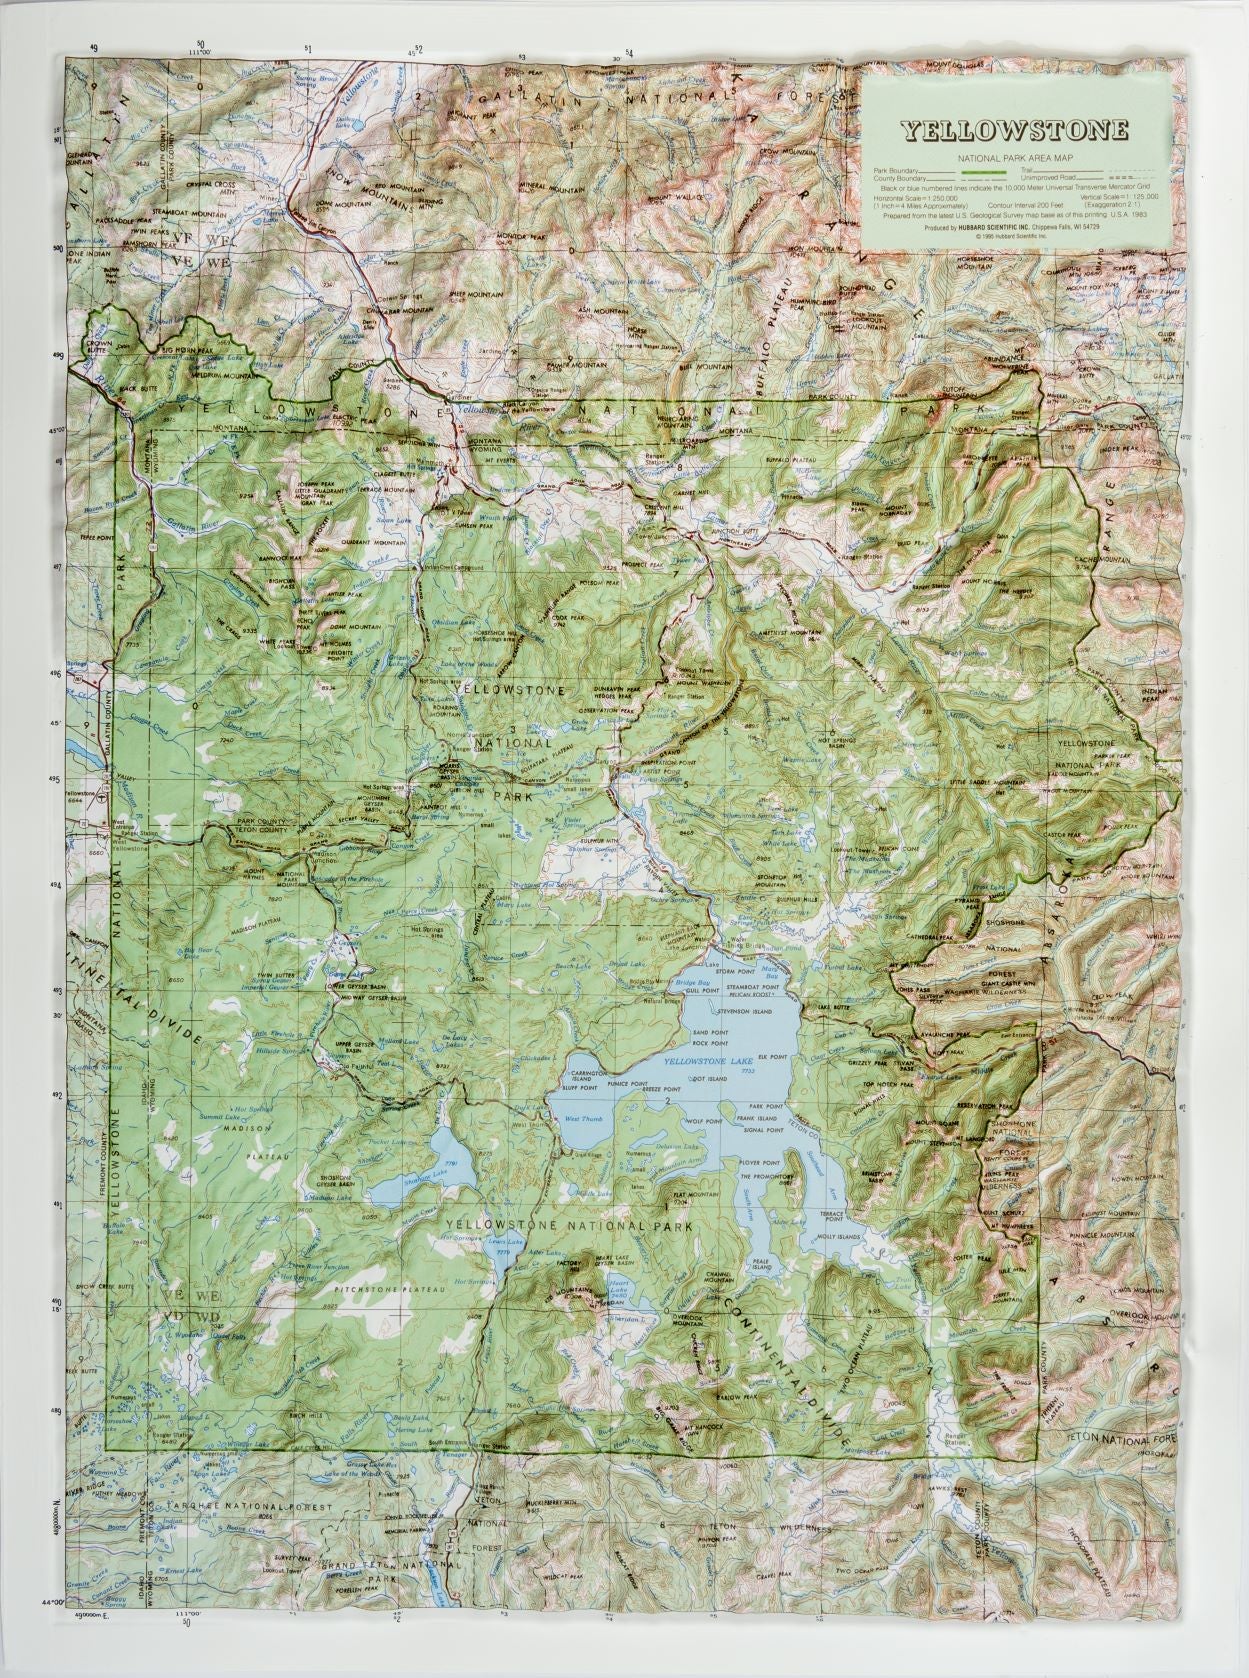 Yellowstone National Park Raised Relief Map